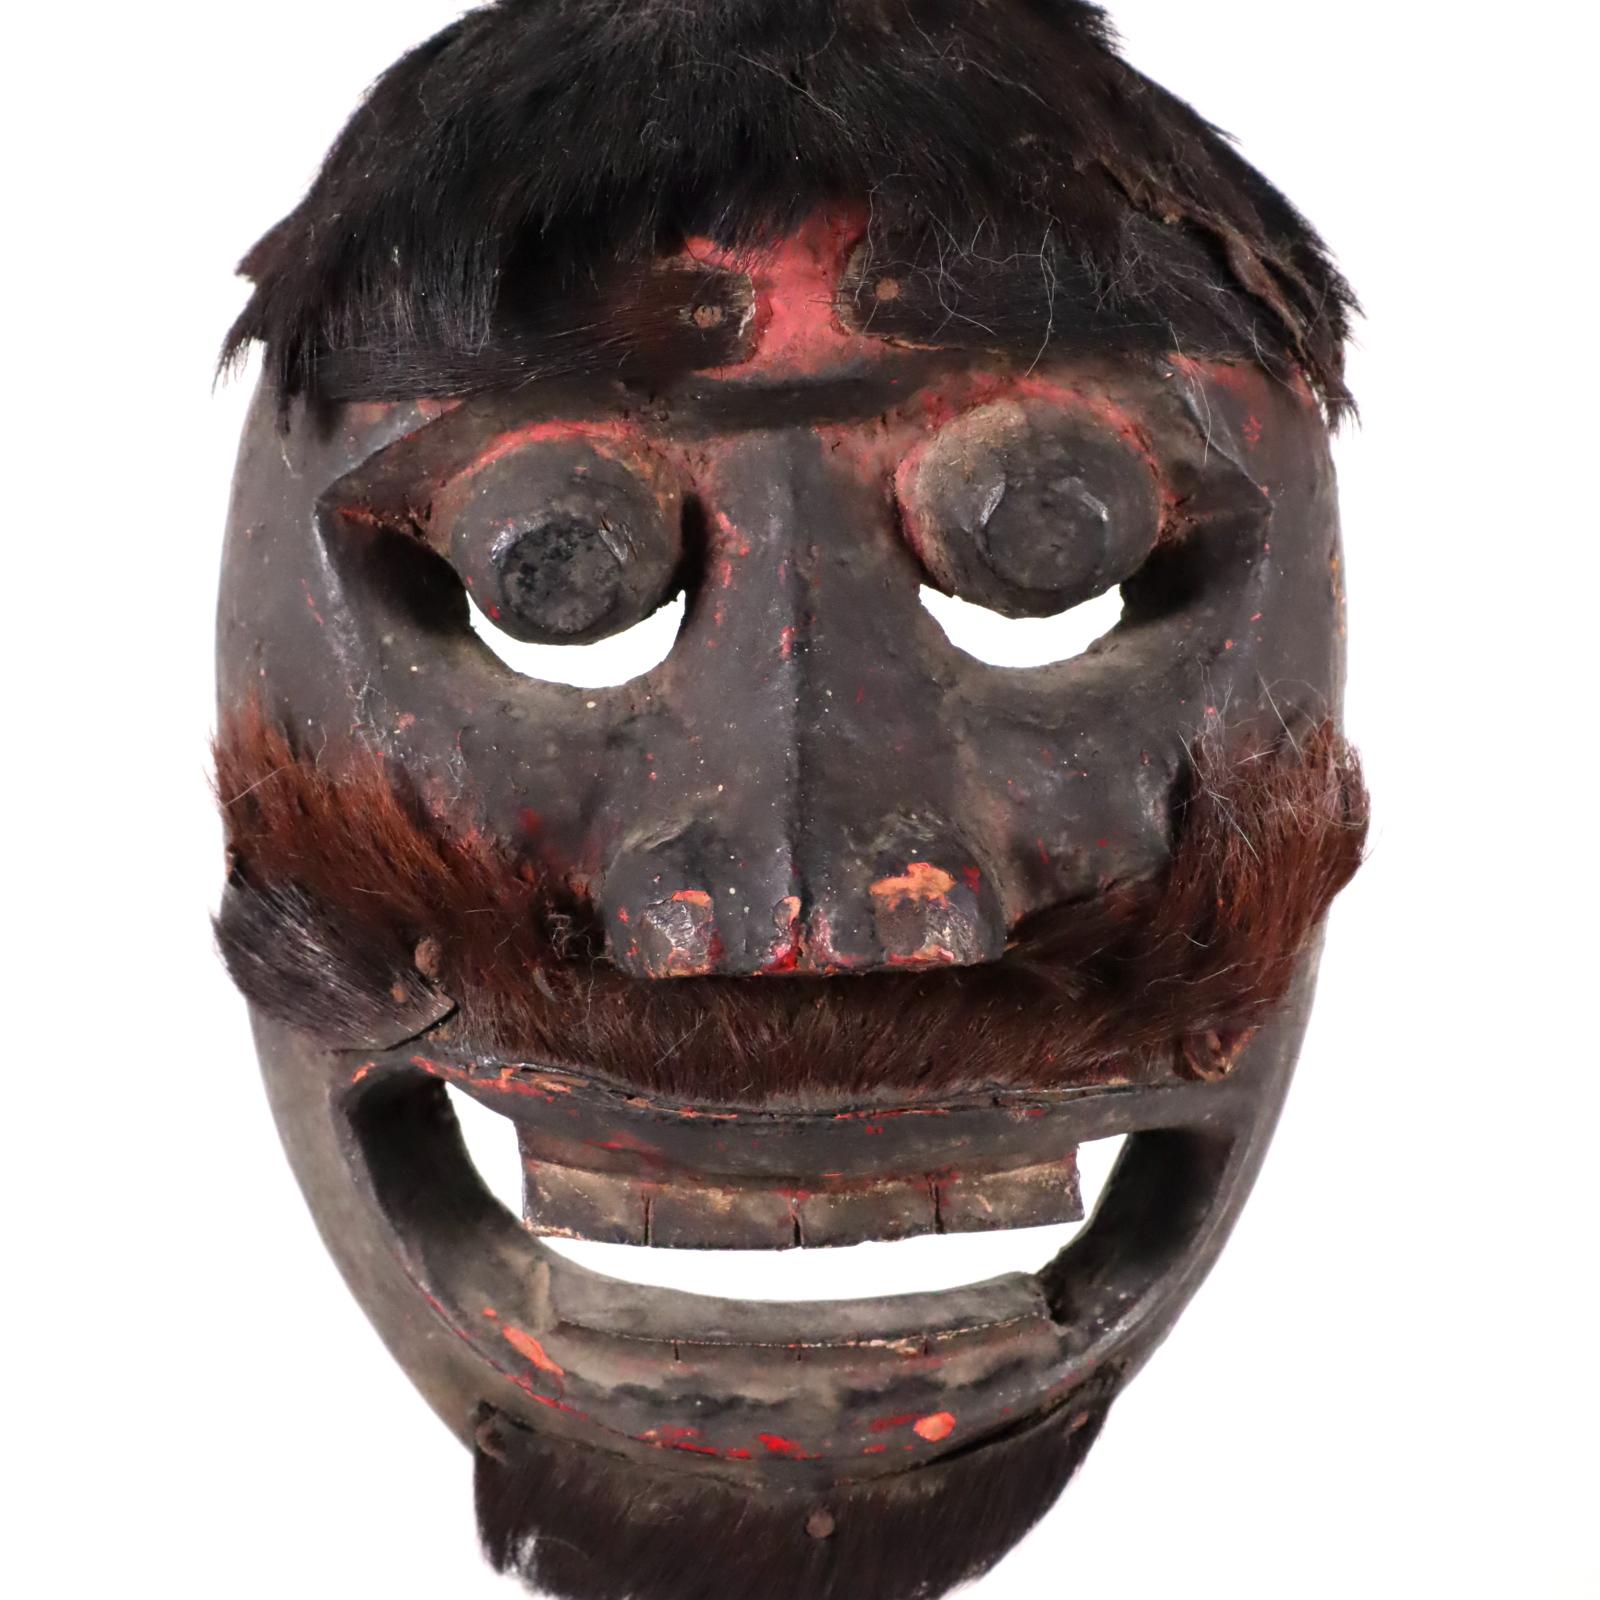 Balinese Wood and Hair Mask from Tribal Indonesia Probably Bali or Lombok Oceanic Art For Sale